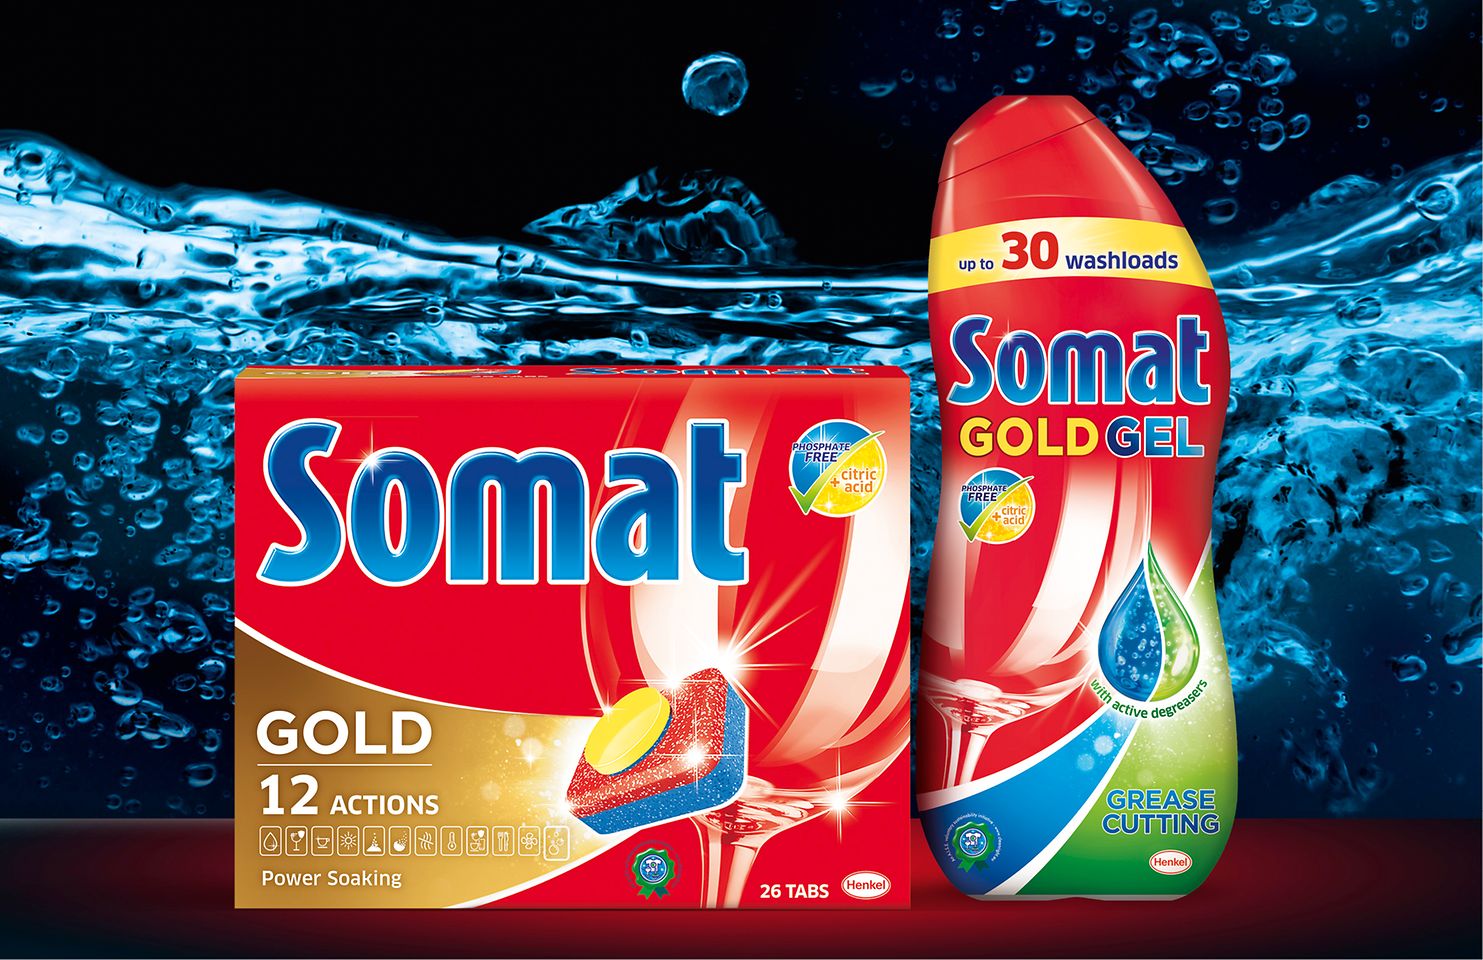 
Innovations Q2/2016: Somat Phosphate-free, Henkel’s first automatic dishwashing product that is free of phosphates, has been introduced in Germany and in more than 20 countries in Western and Eastern Europe.